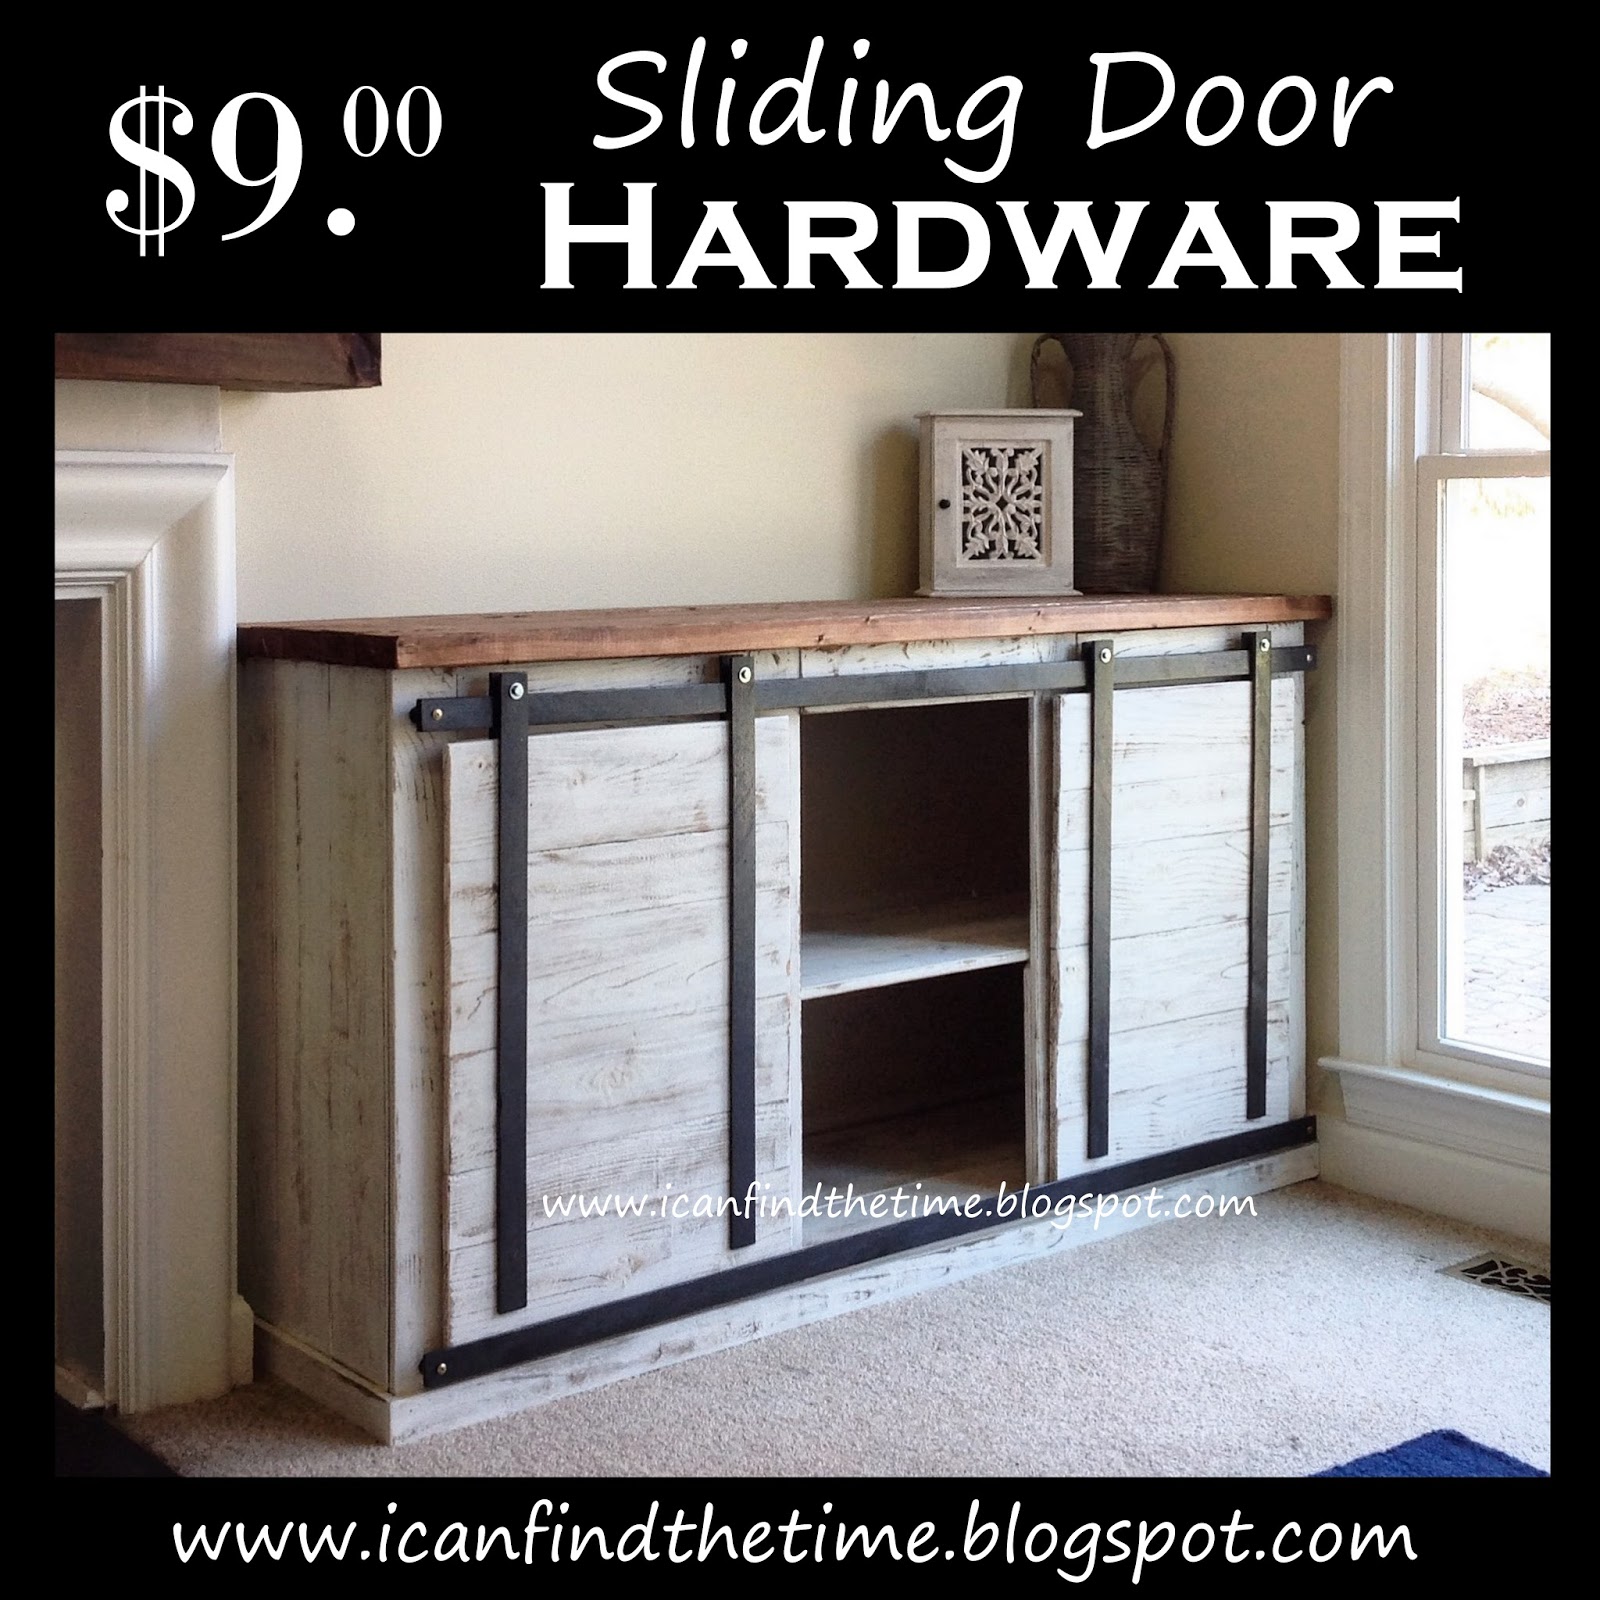 A New (Cheaper) Way to do Sliding Doors on Furniture